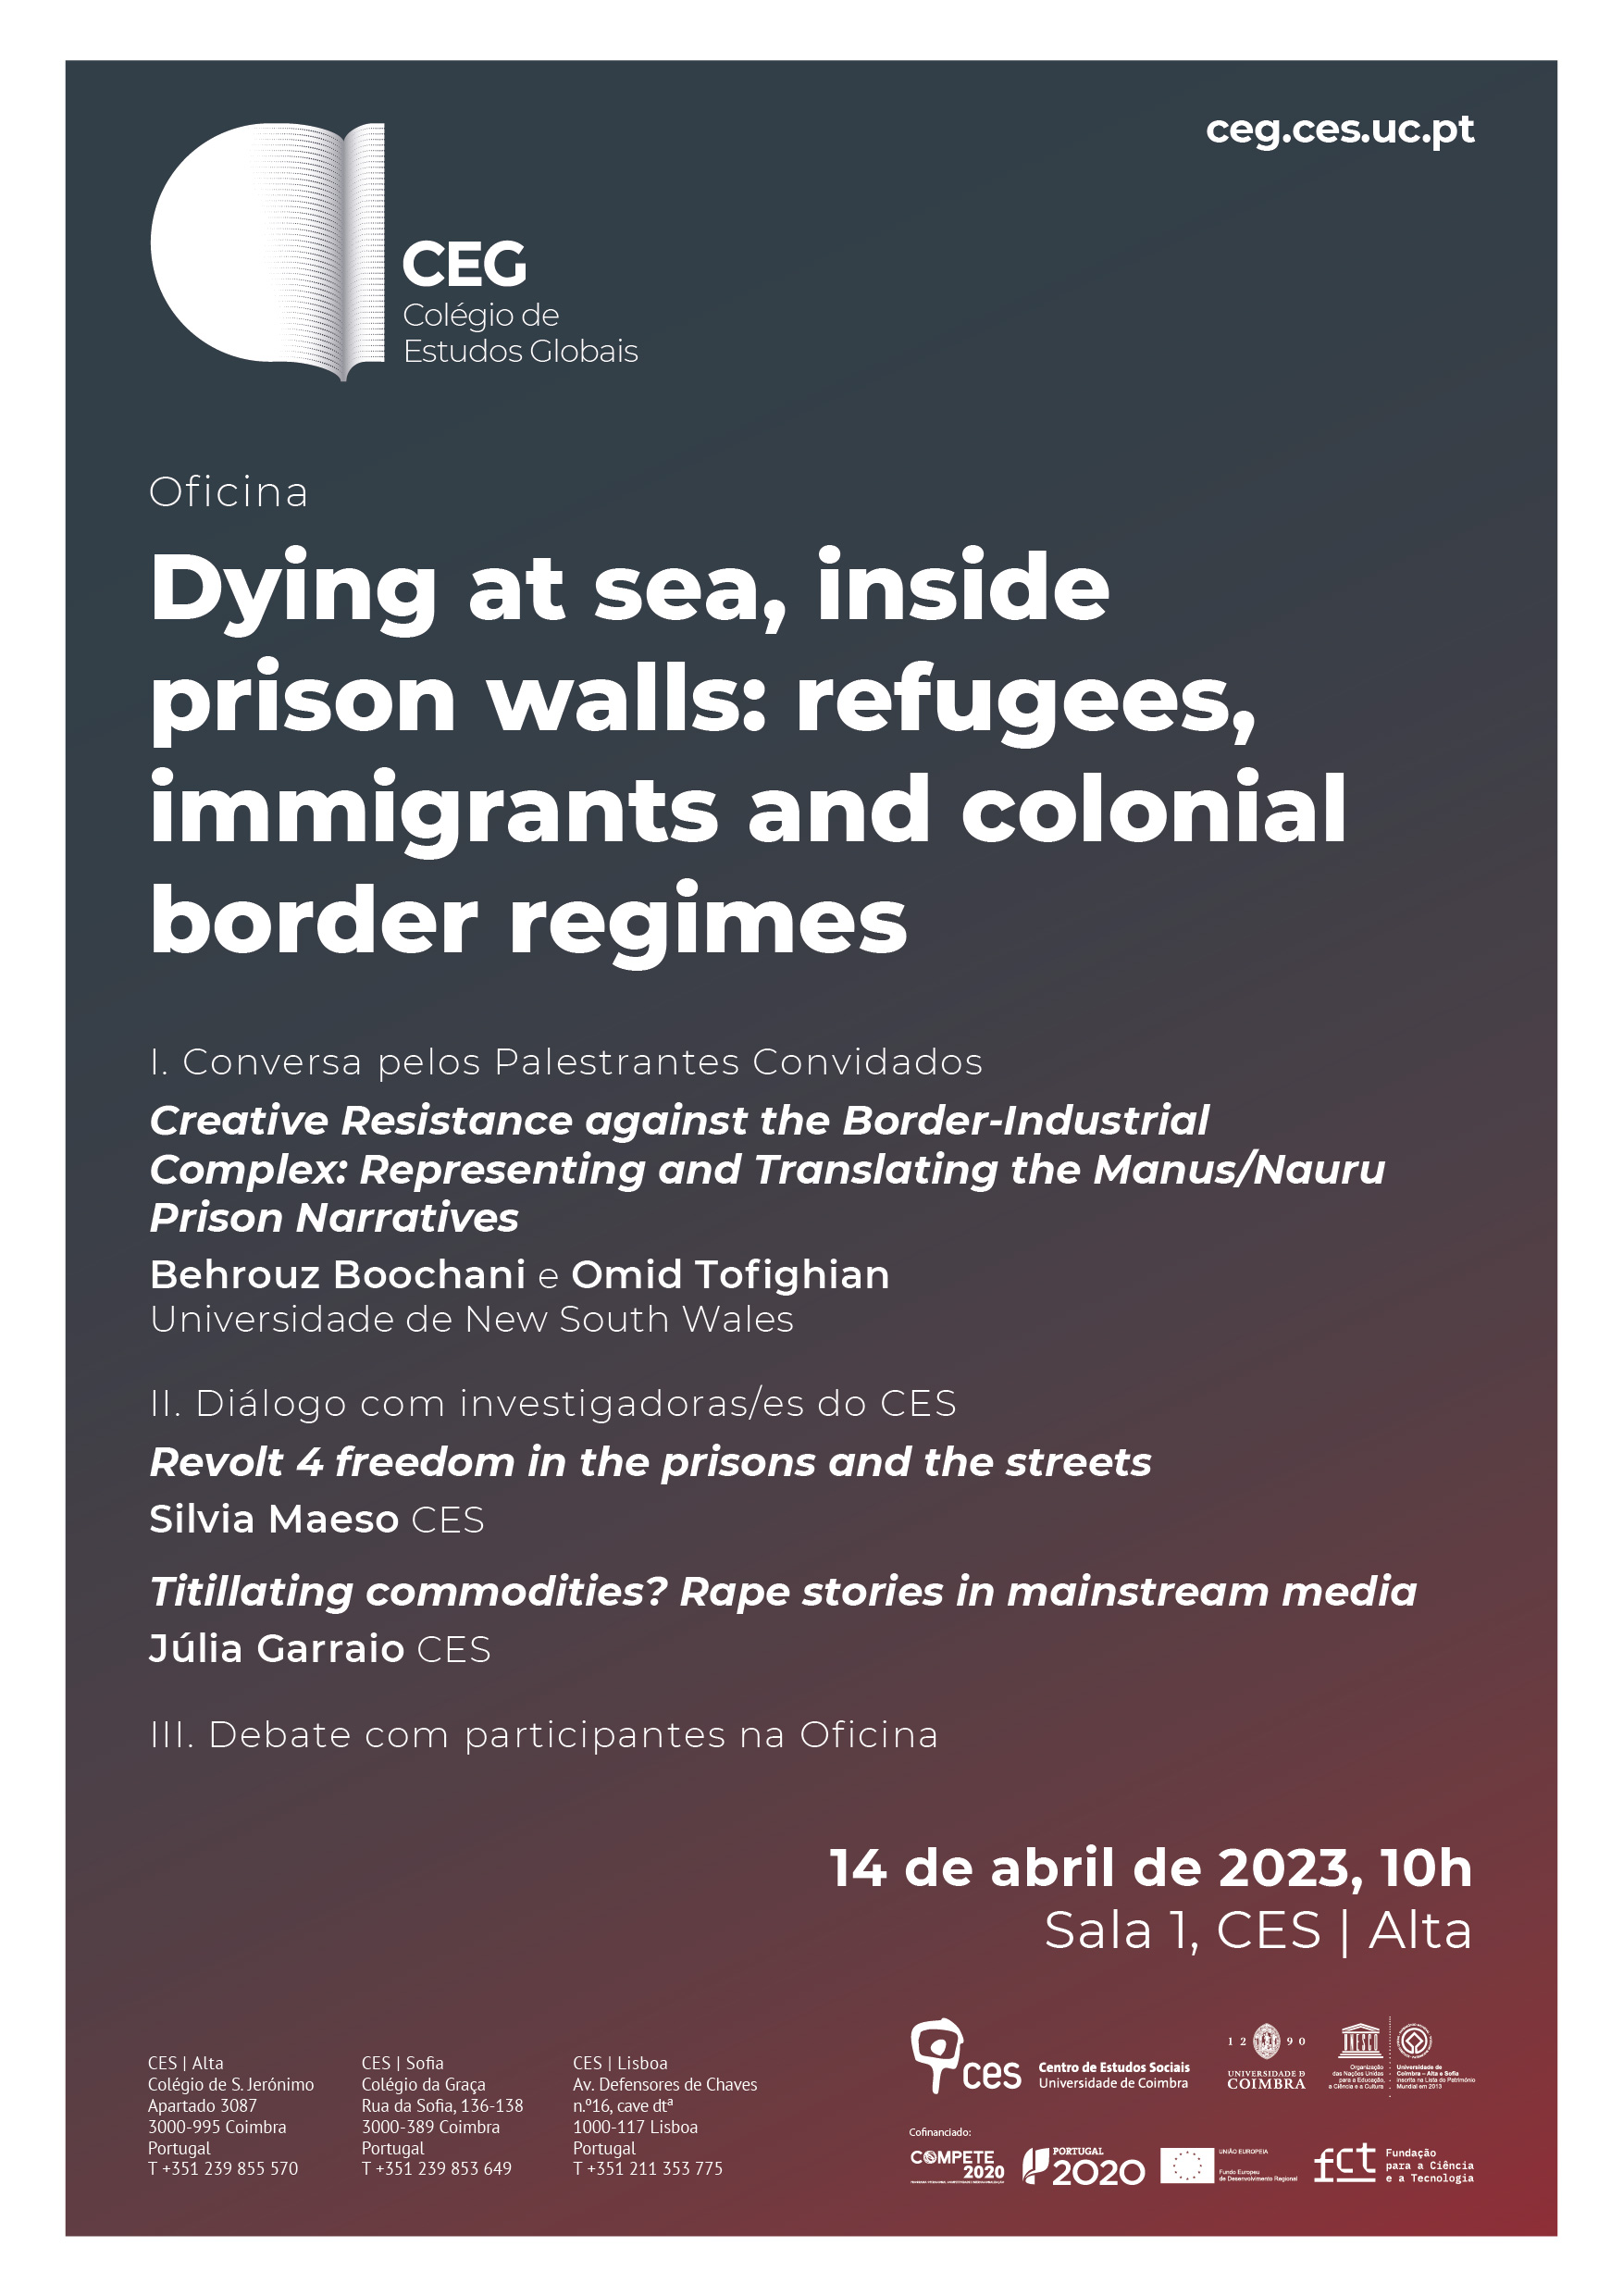 Dying at sea, inside prison walls: refugees, immigrants and colonial border regimes<span id="edit_42063"><script>$(function() { $('#edit_42063').load( "/myces/user/editobj.php?tipo=evento&id=42063" ); });</script></span>